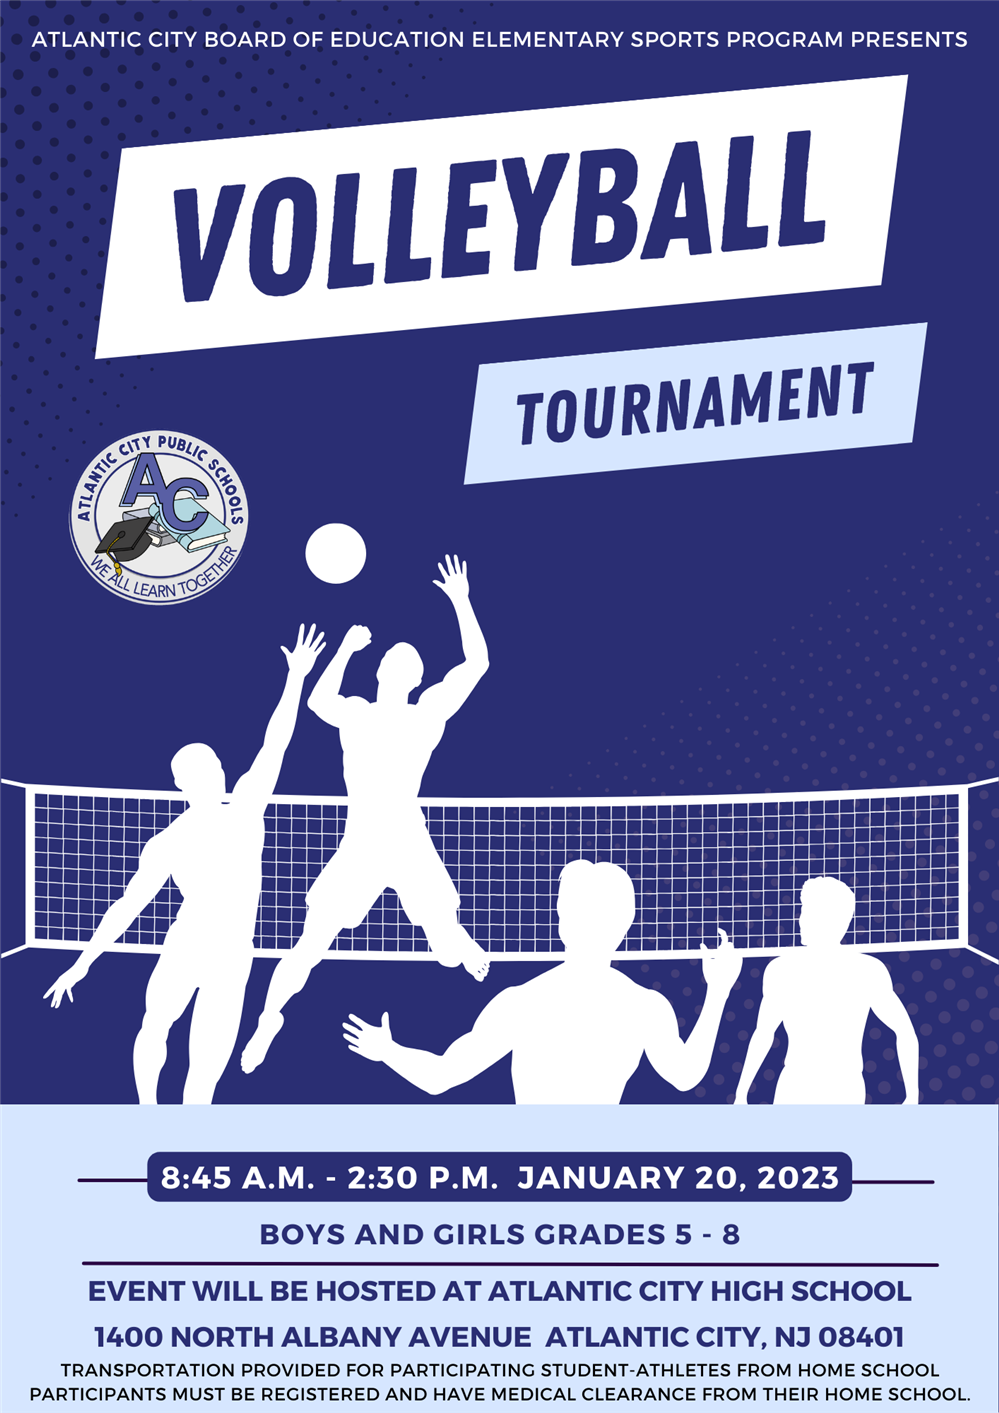  ACPS Volleyball Tournament Flyer